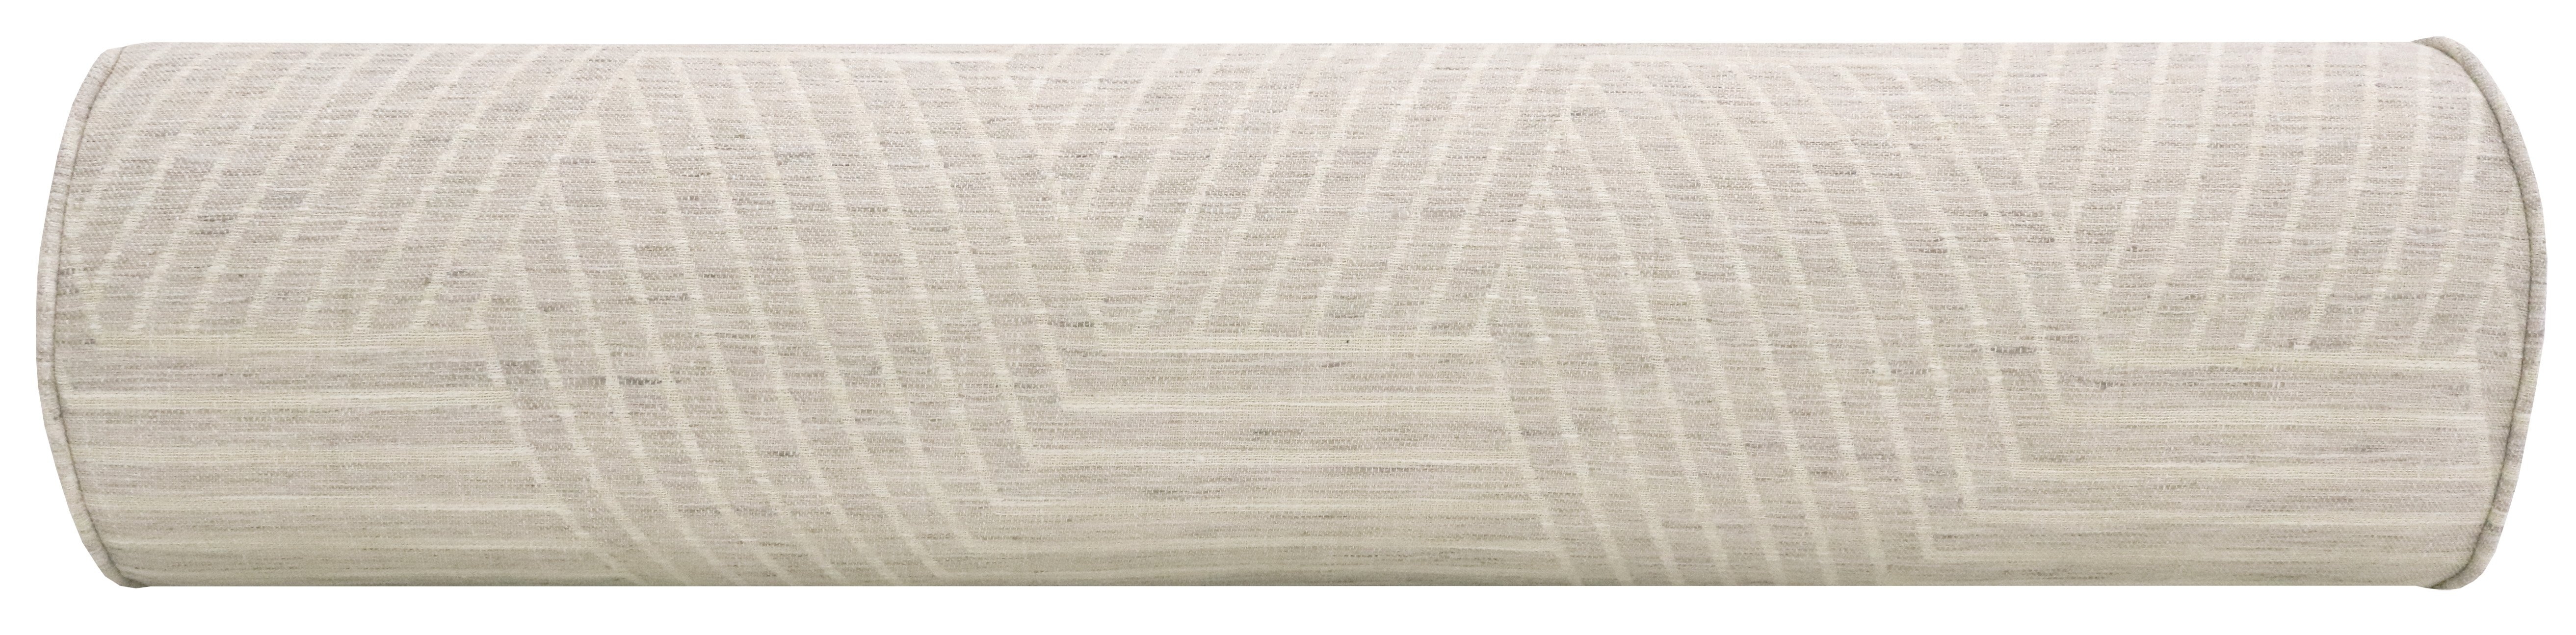 THE BOLSTER :: LABYRINTH LINEN // OYSTER - KING // 9" X 48" - Image 2